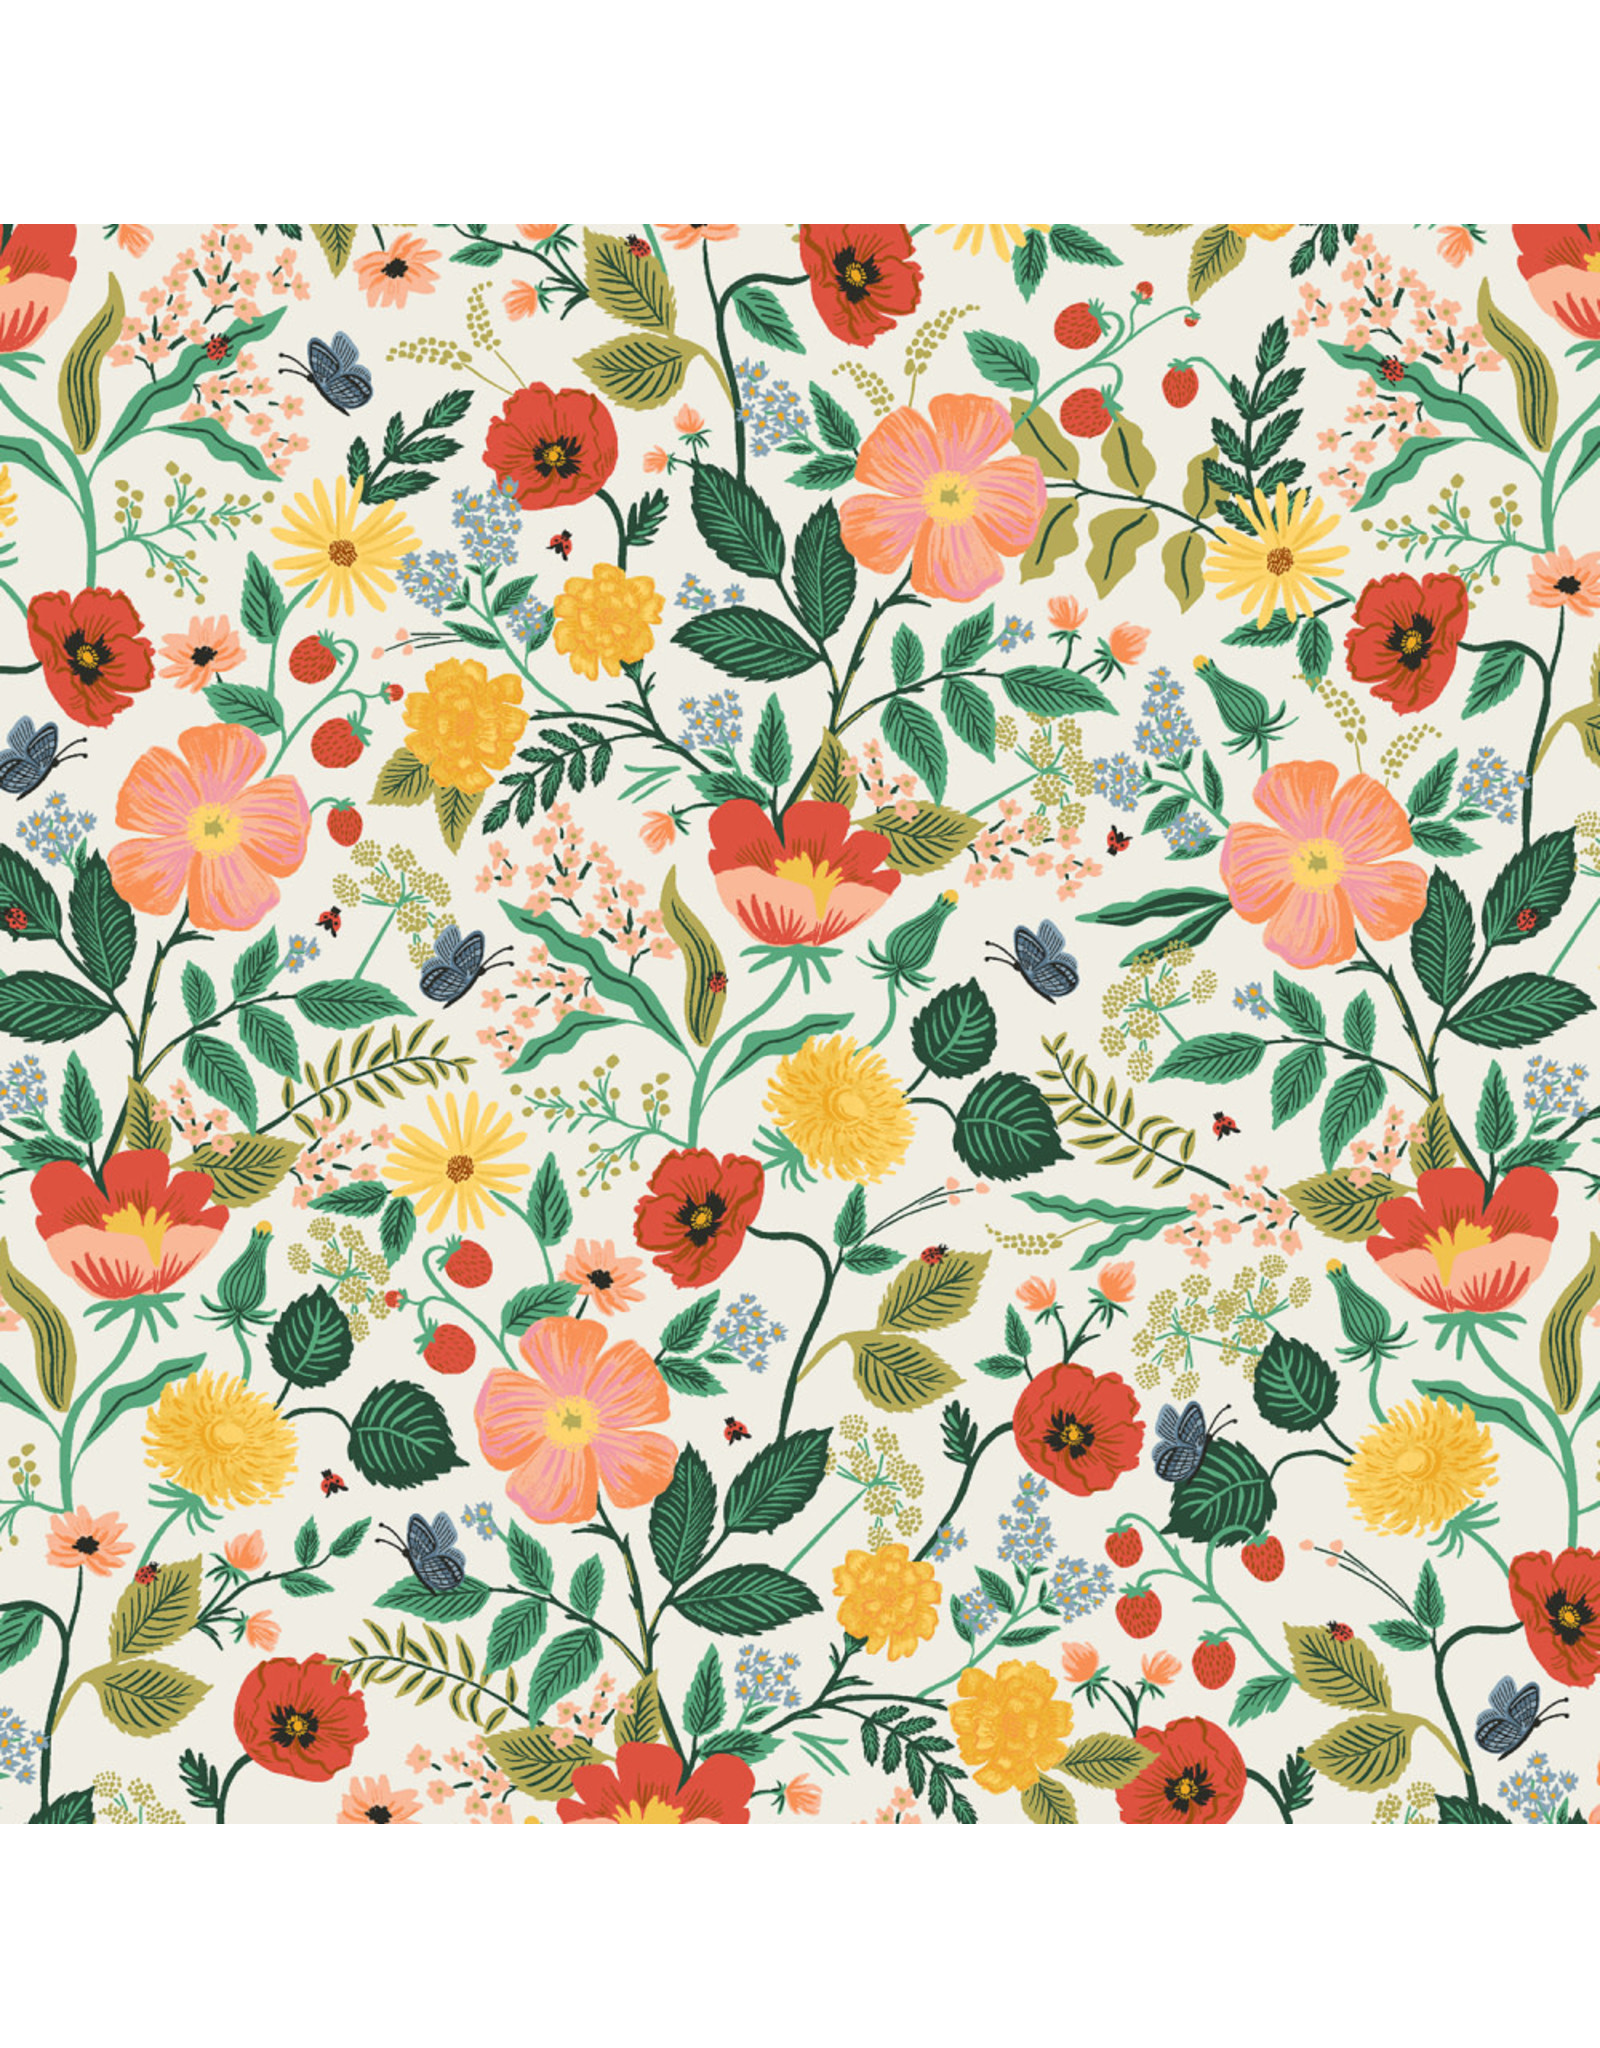 Rifle Paper Co. Camont, Poppy Fields in Cream, Fabric Half-Yards